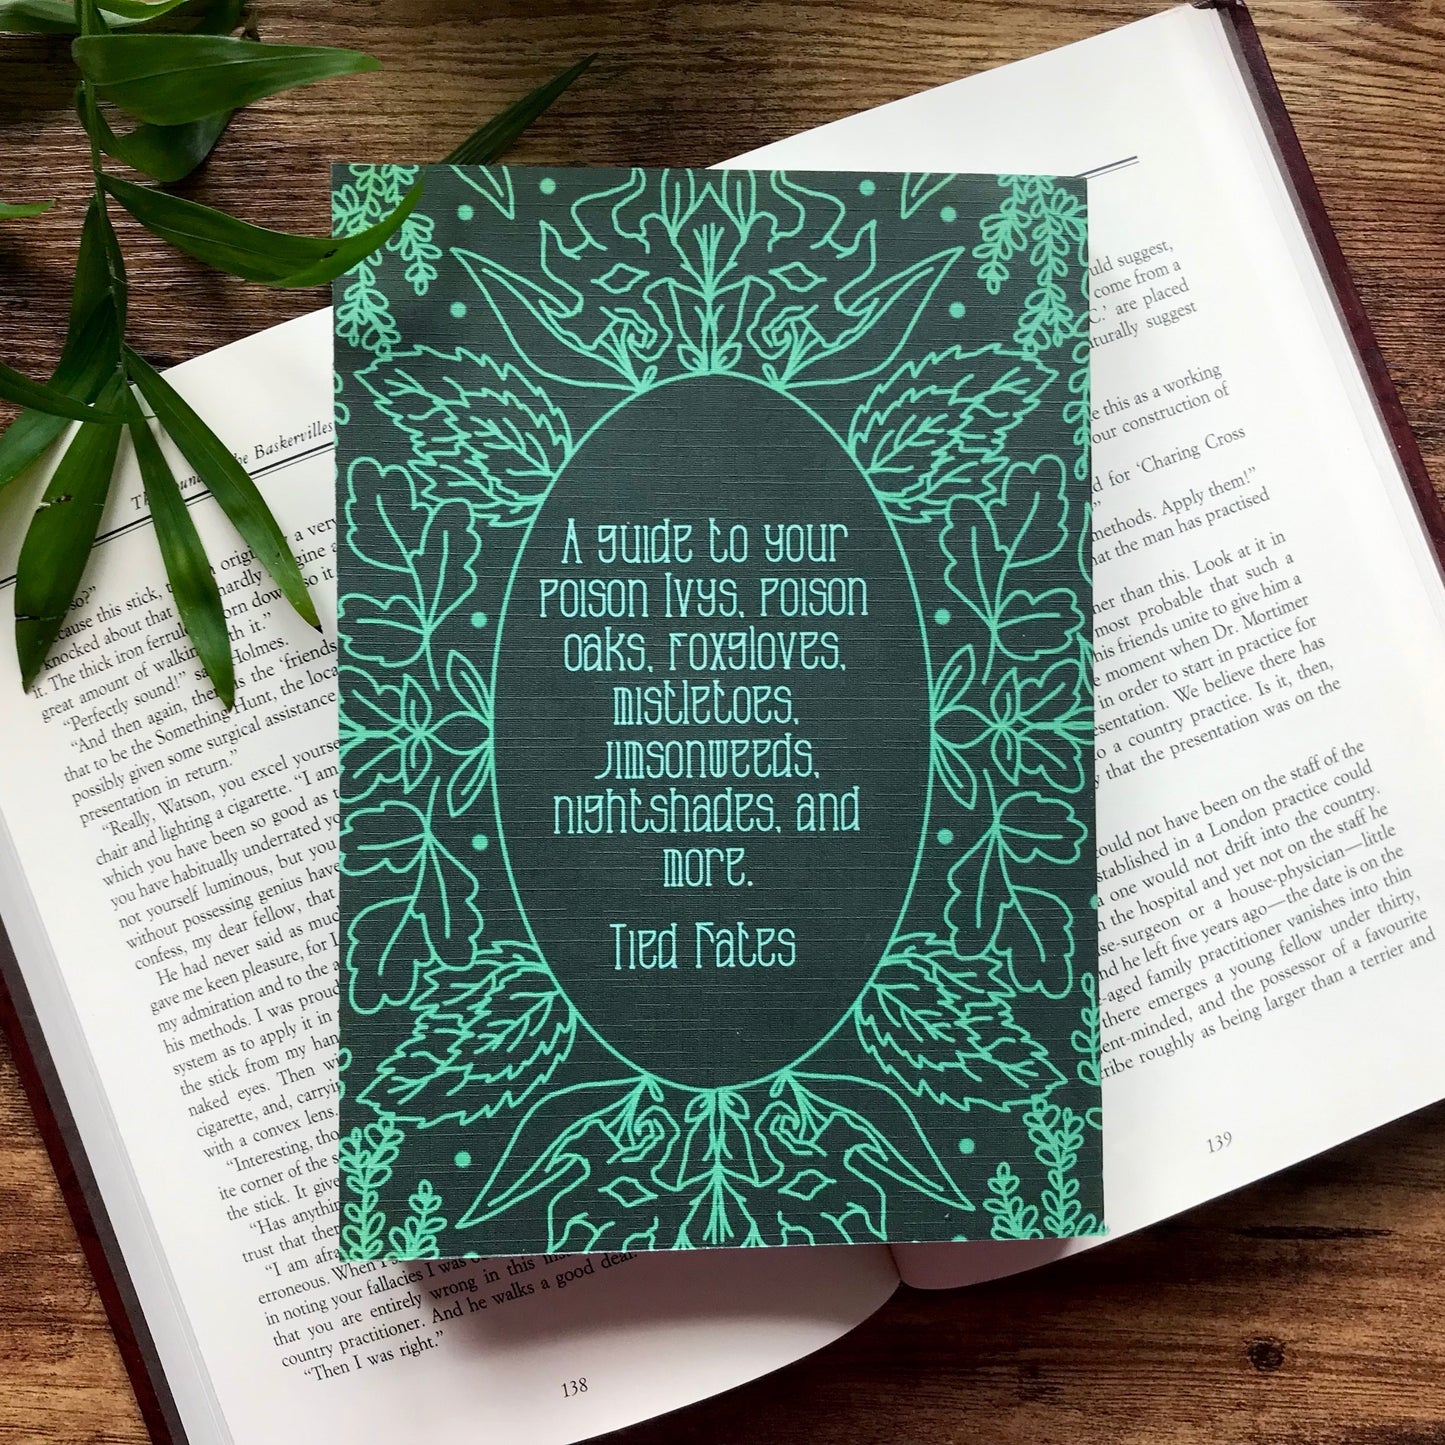 The Guide to Poisonous Plants, A5 Softcover Notebook